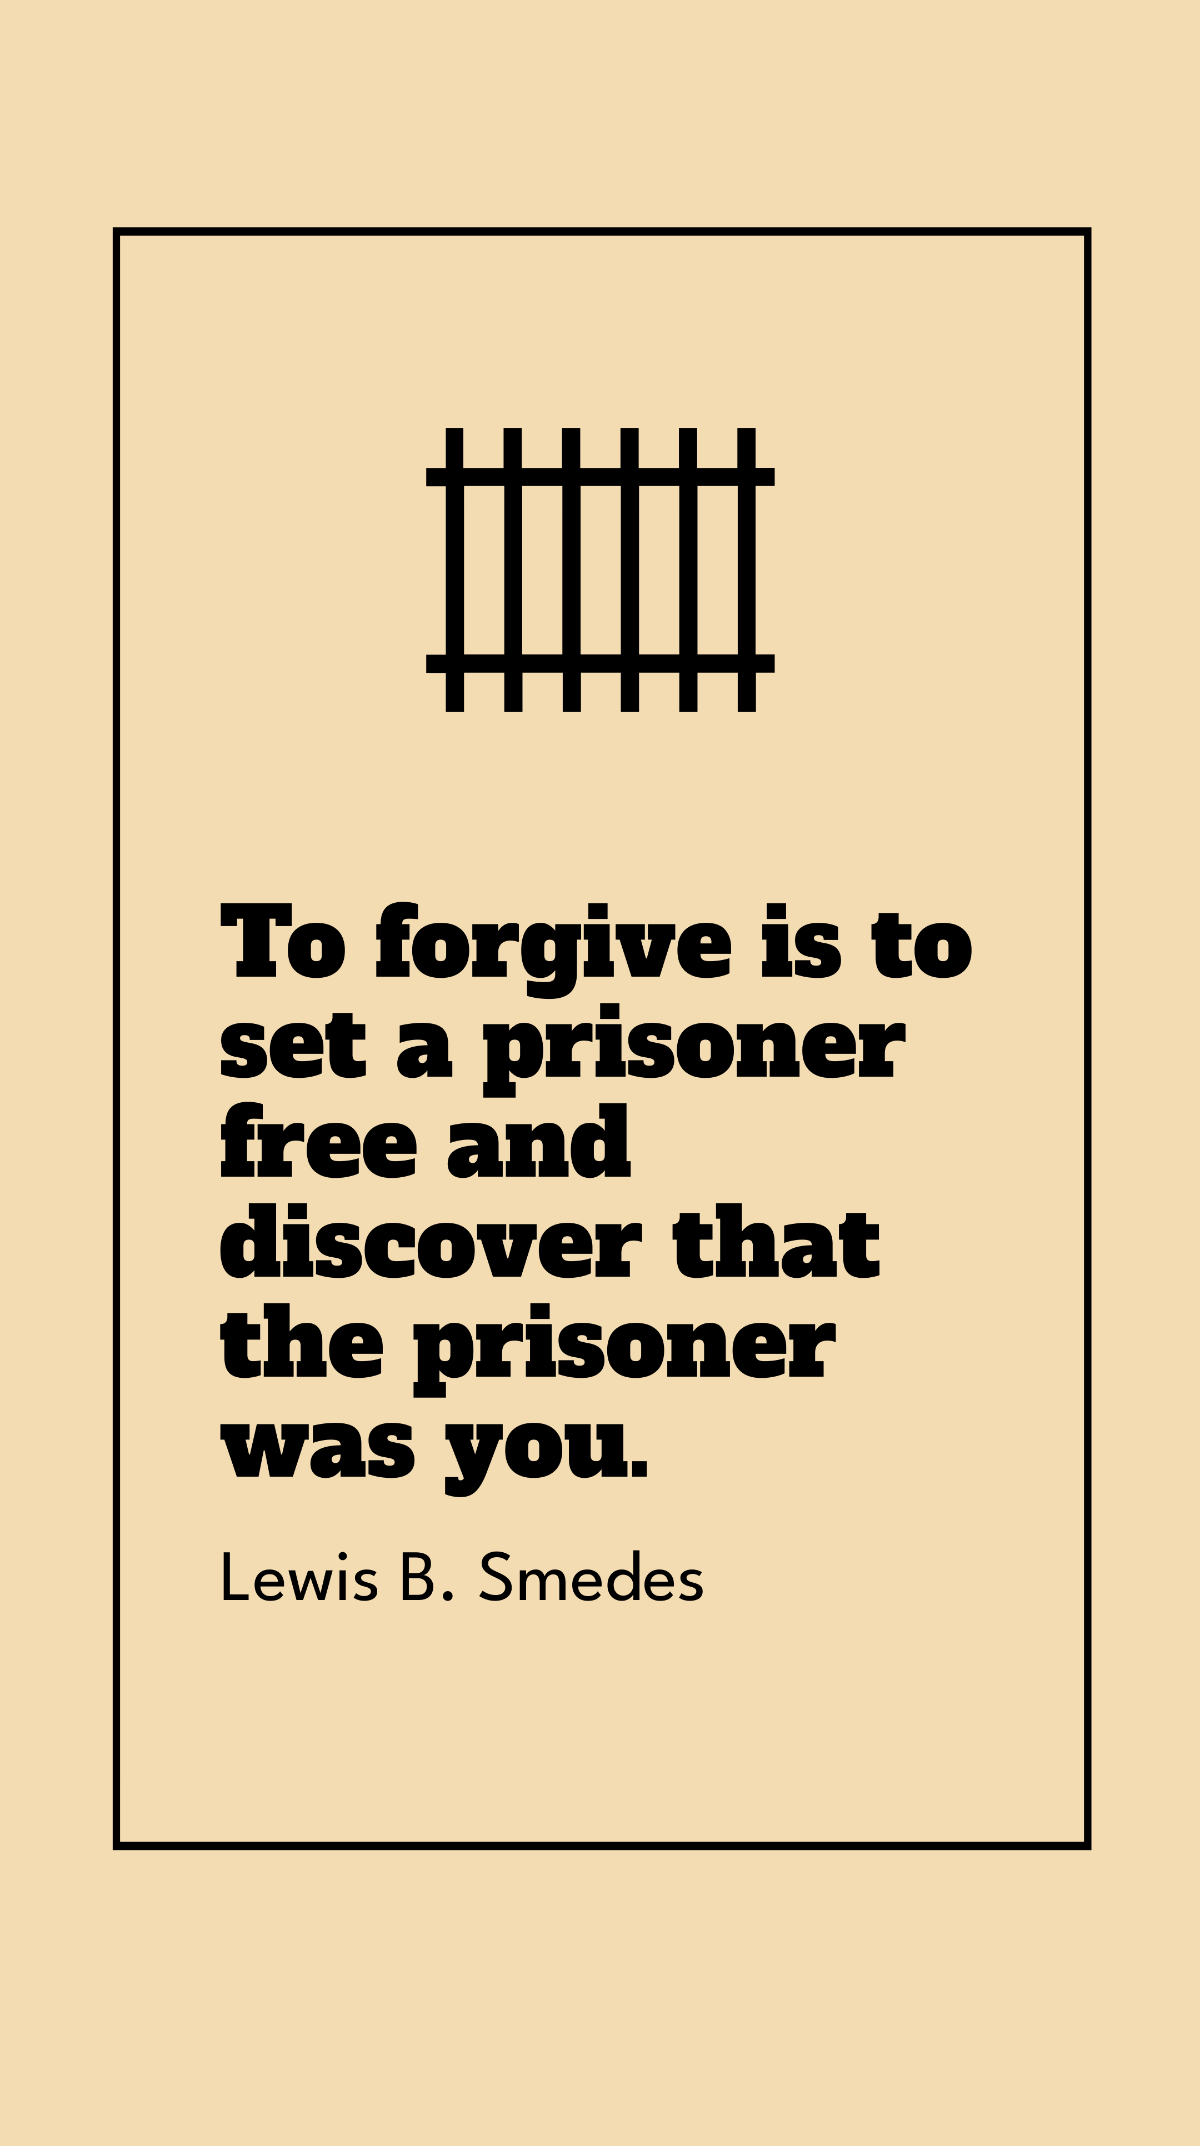 Free Lewis B. Smedes - To forgive is to set a prisoner and discover that the prisoner was you. Template